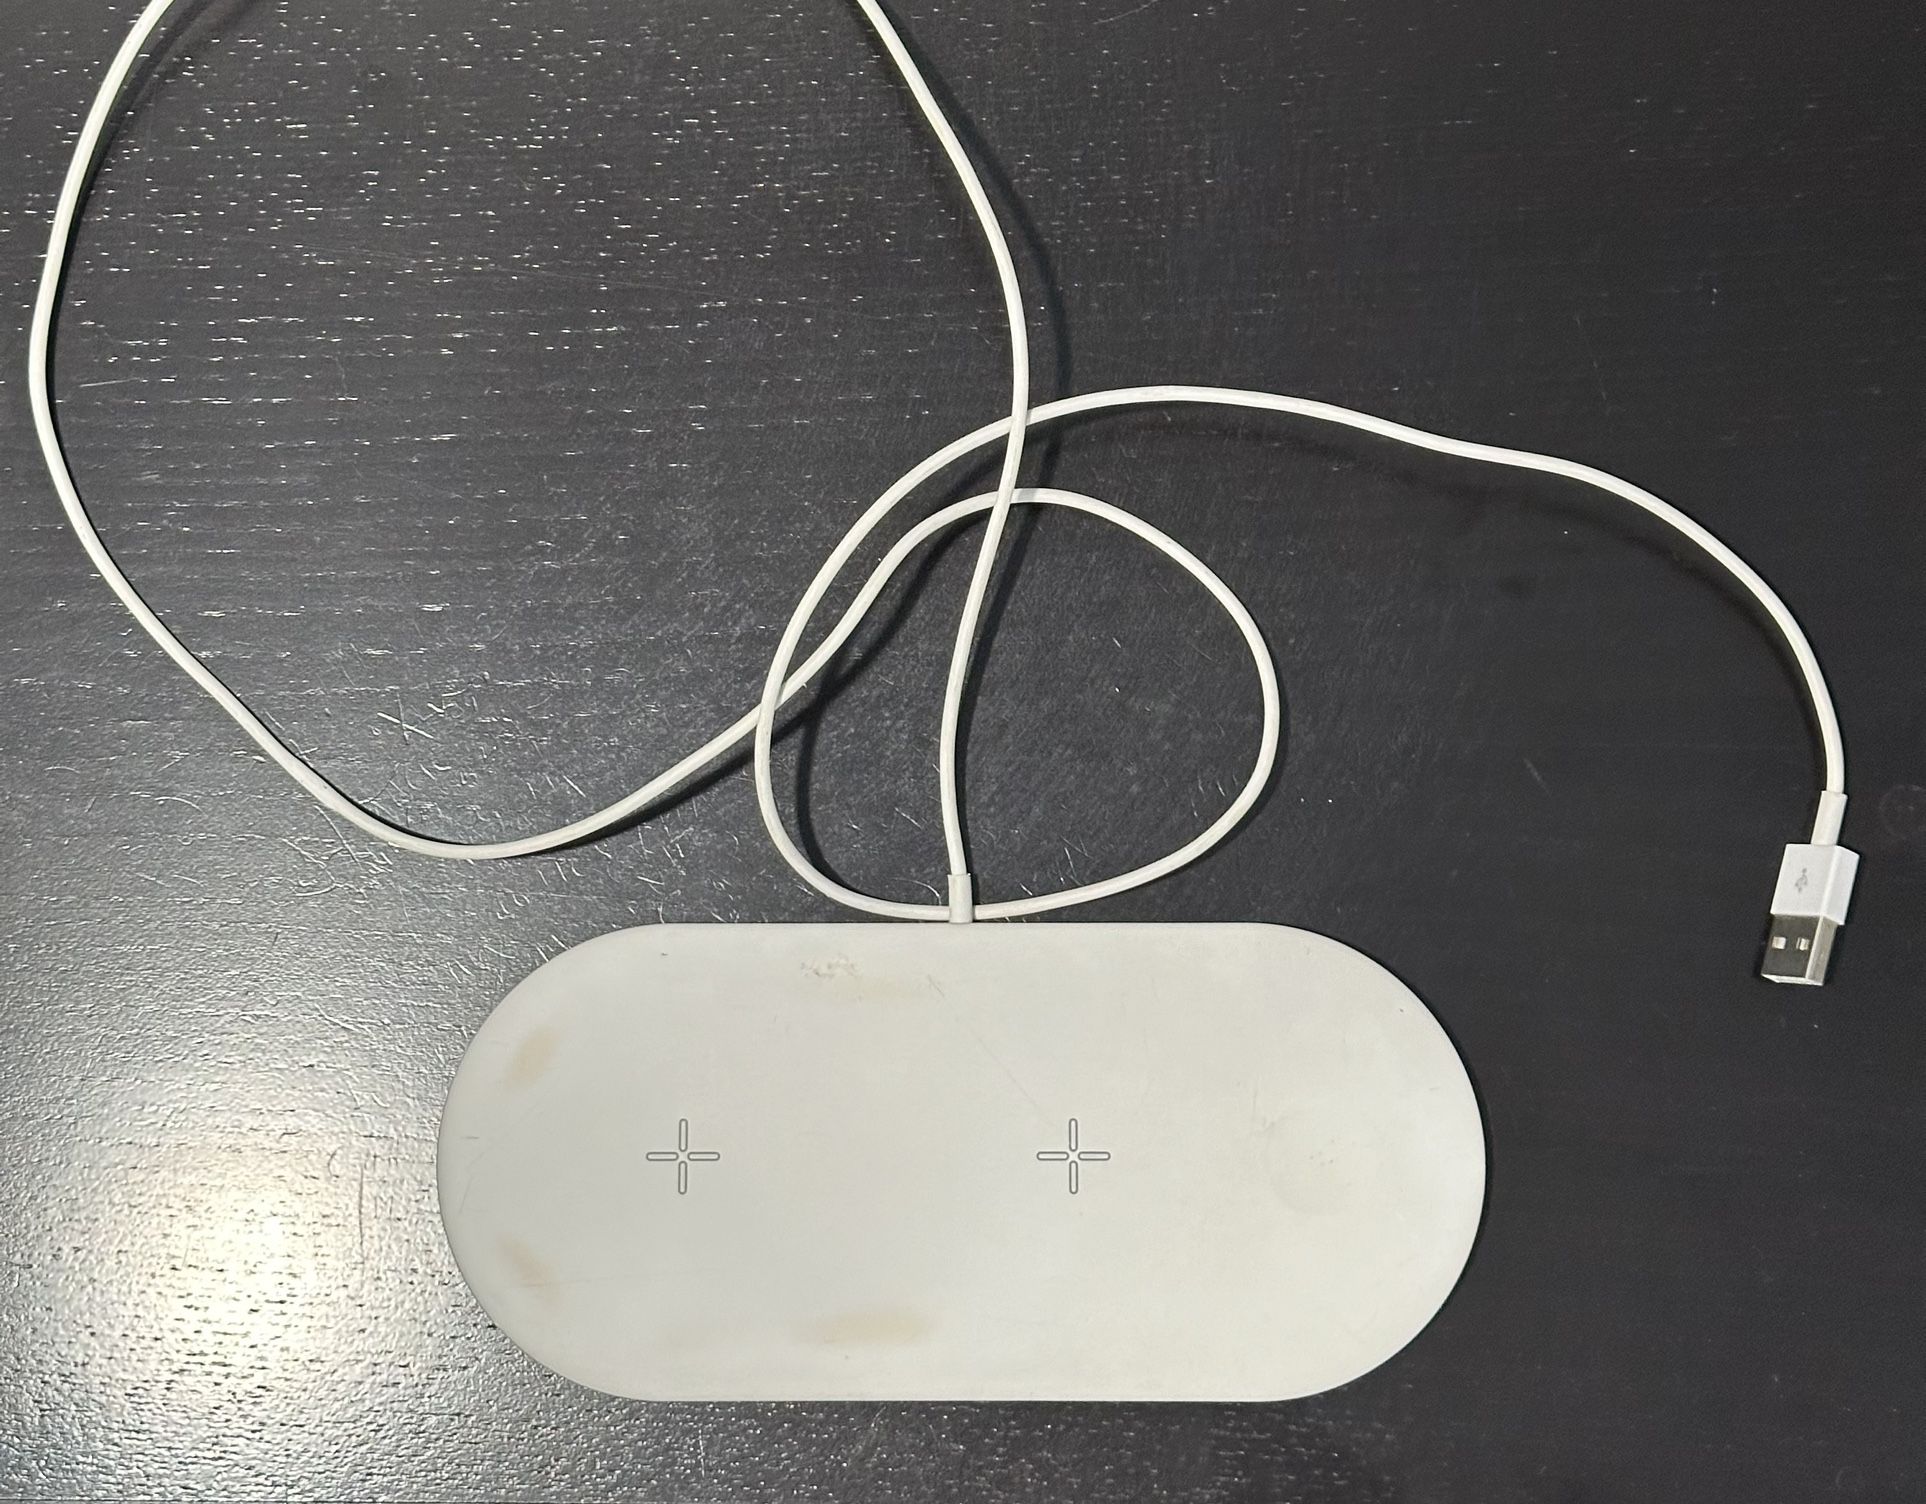 Wireless charger (2 spaces + 1 for apple watch)